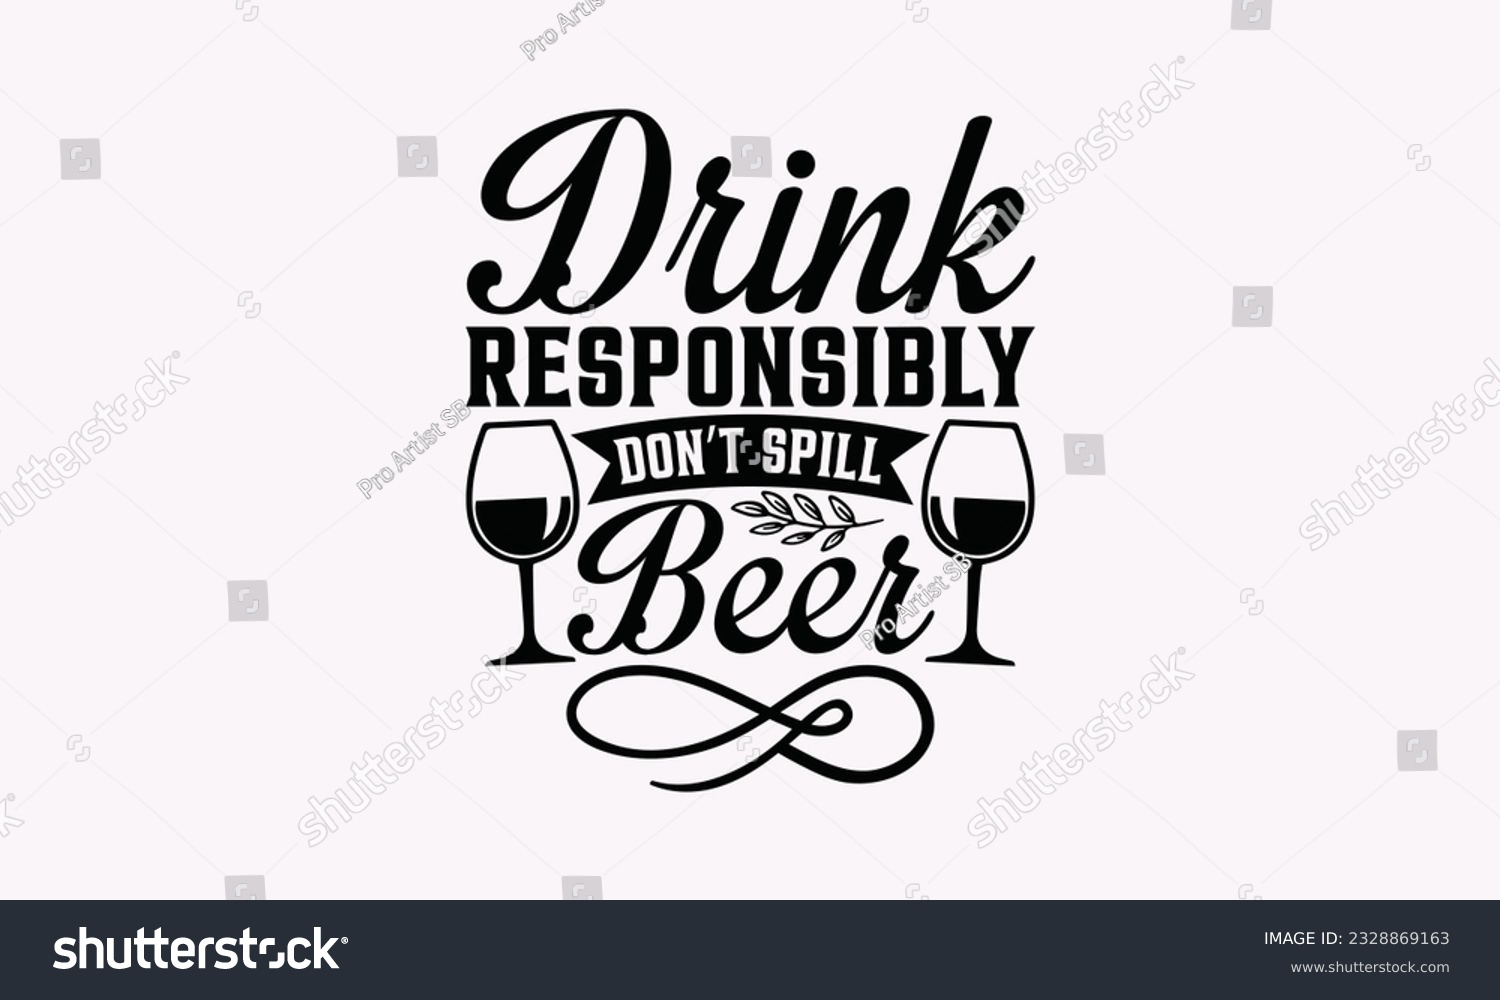 SVG of Drink Responsibly Don’t Spill Beer - Alcohol SVG Design, Cheer Quotes, Hand drawn lettering phrase, Isolated on white background. svg